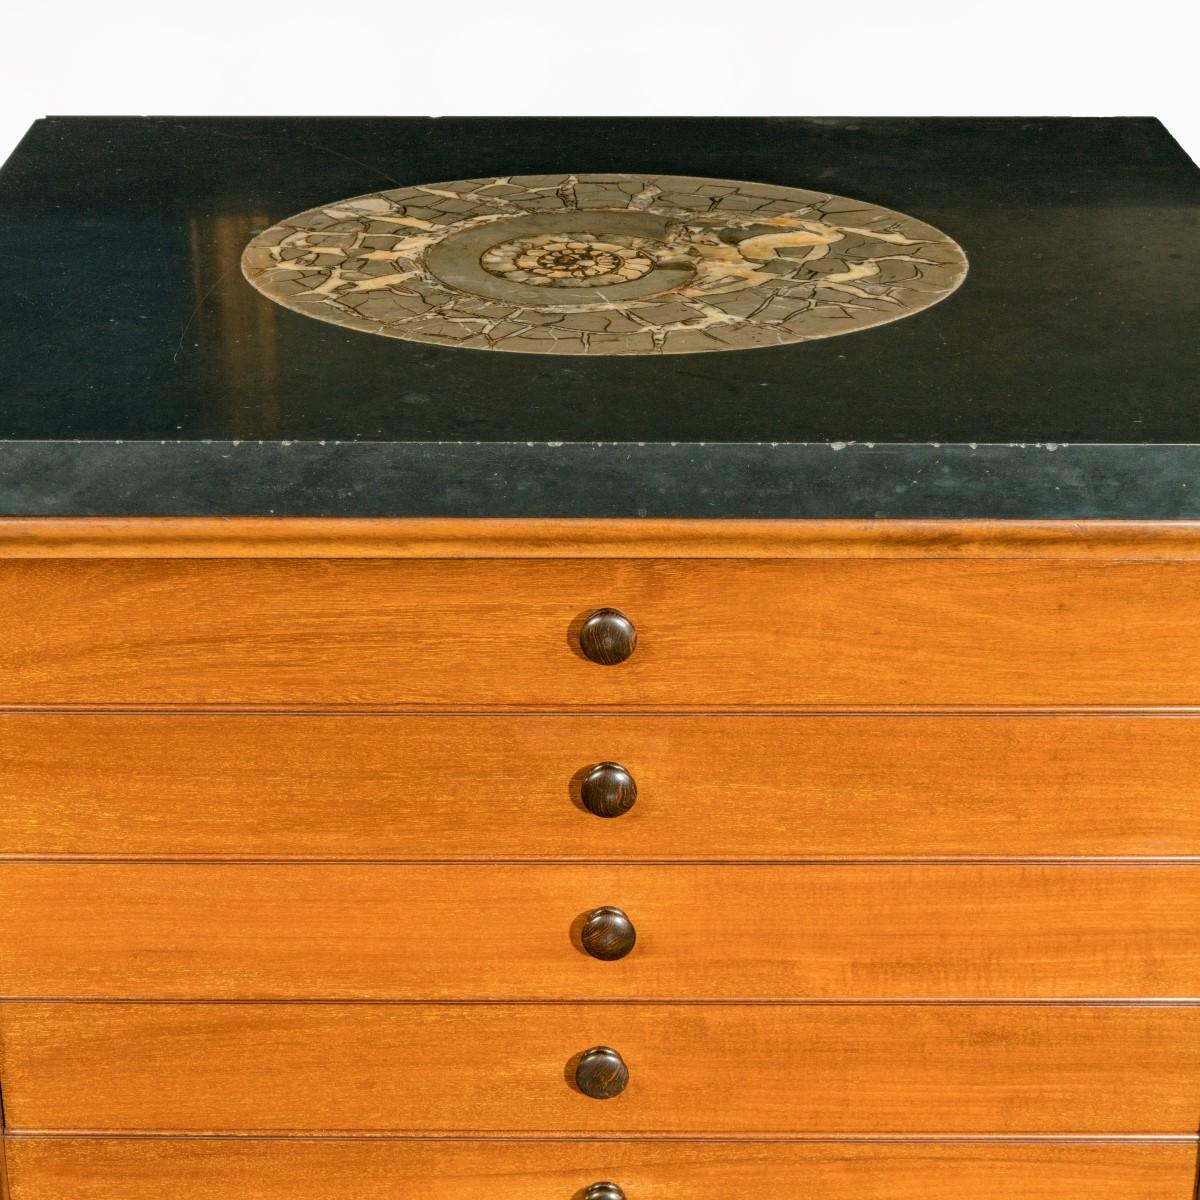 A Victorian mahogany collector’s cabinet with a fossil marble top